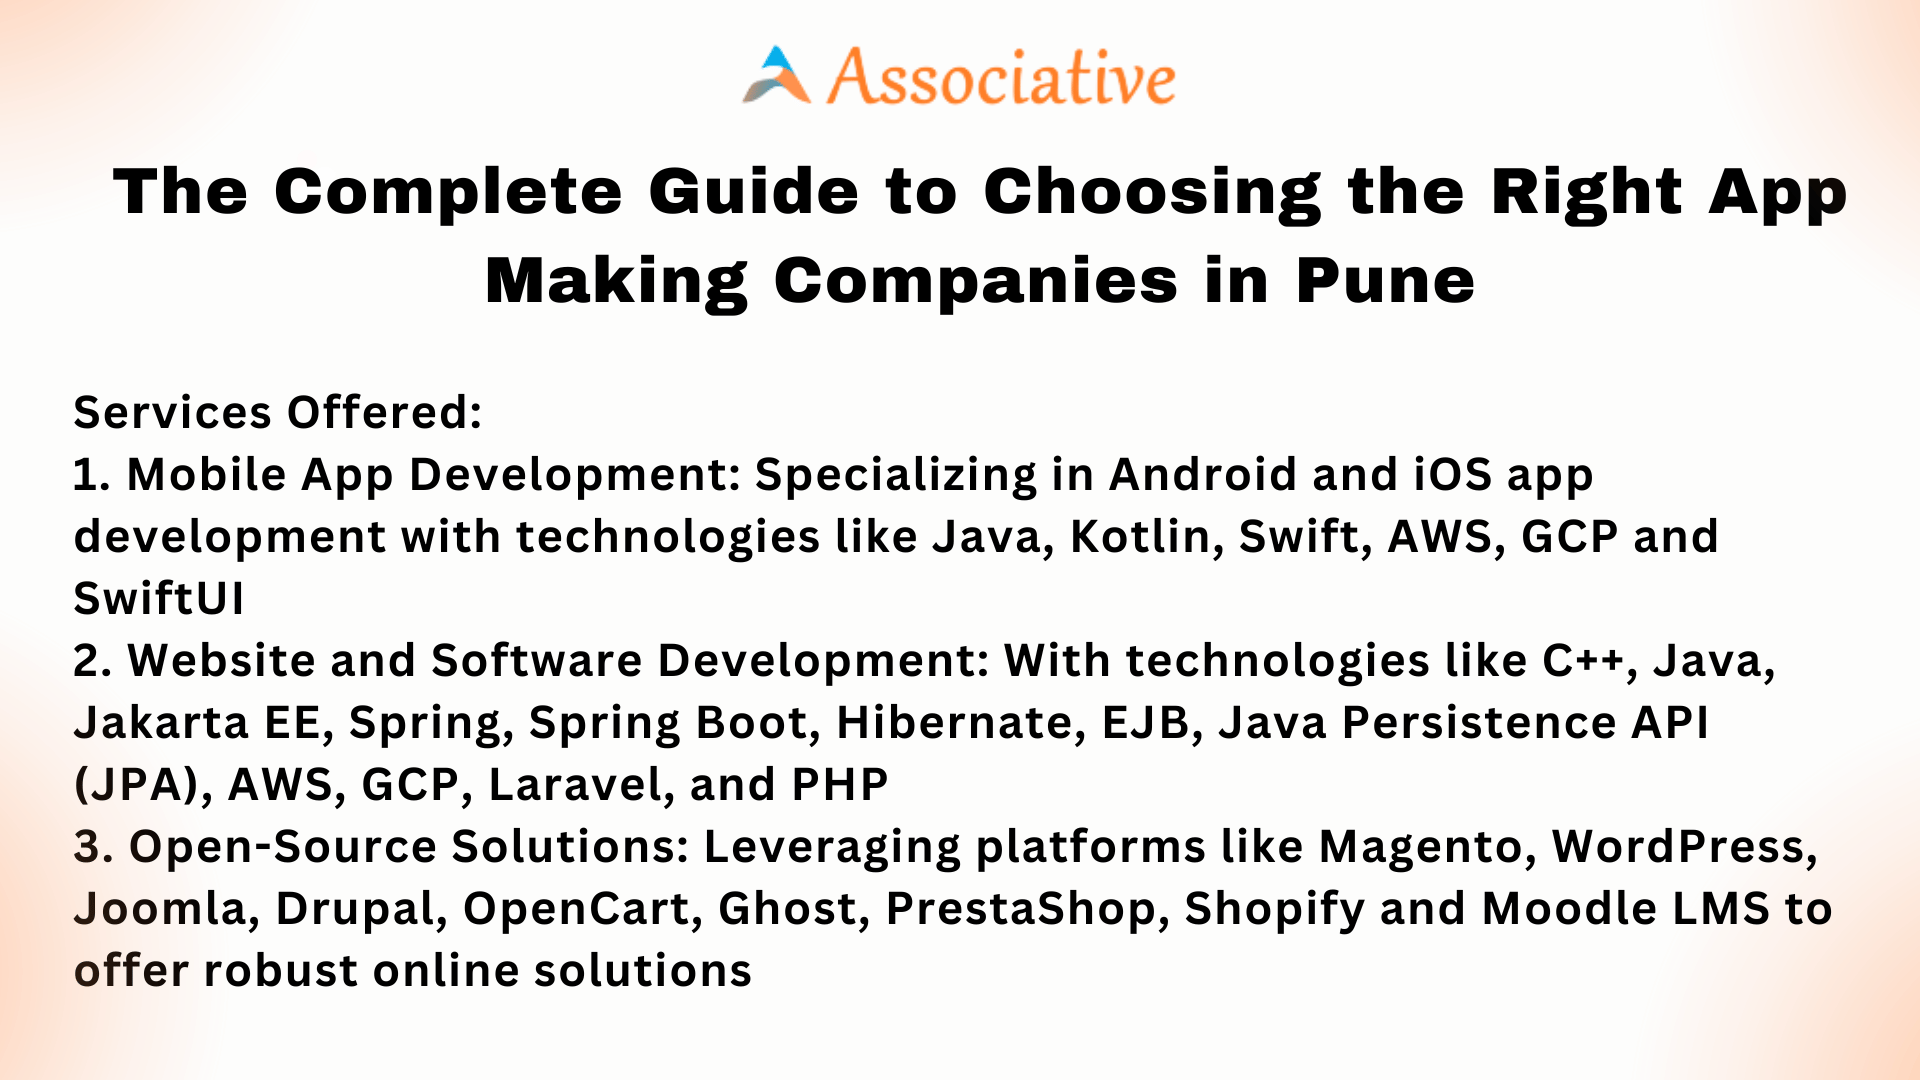 The Complete Guide to Choosing the Right App Making Companies in Pune